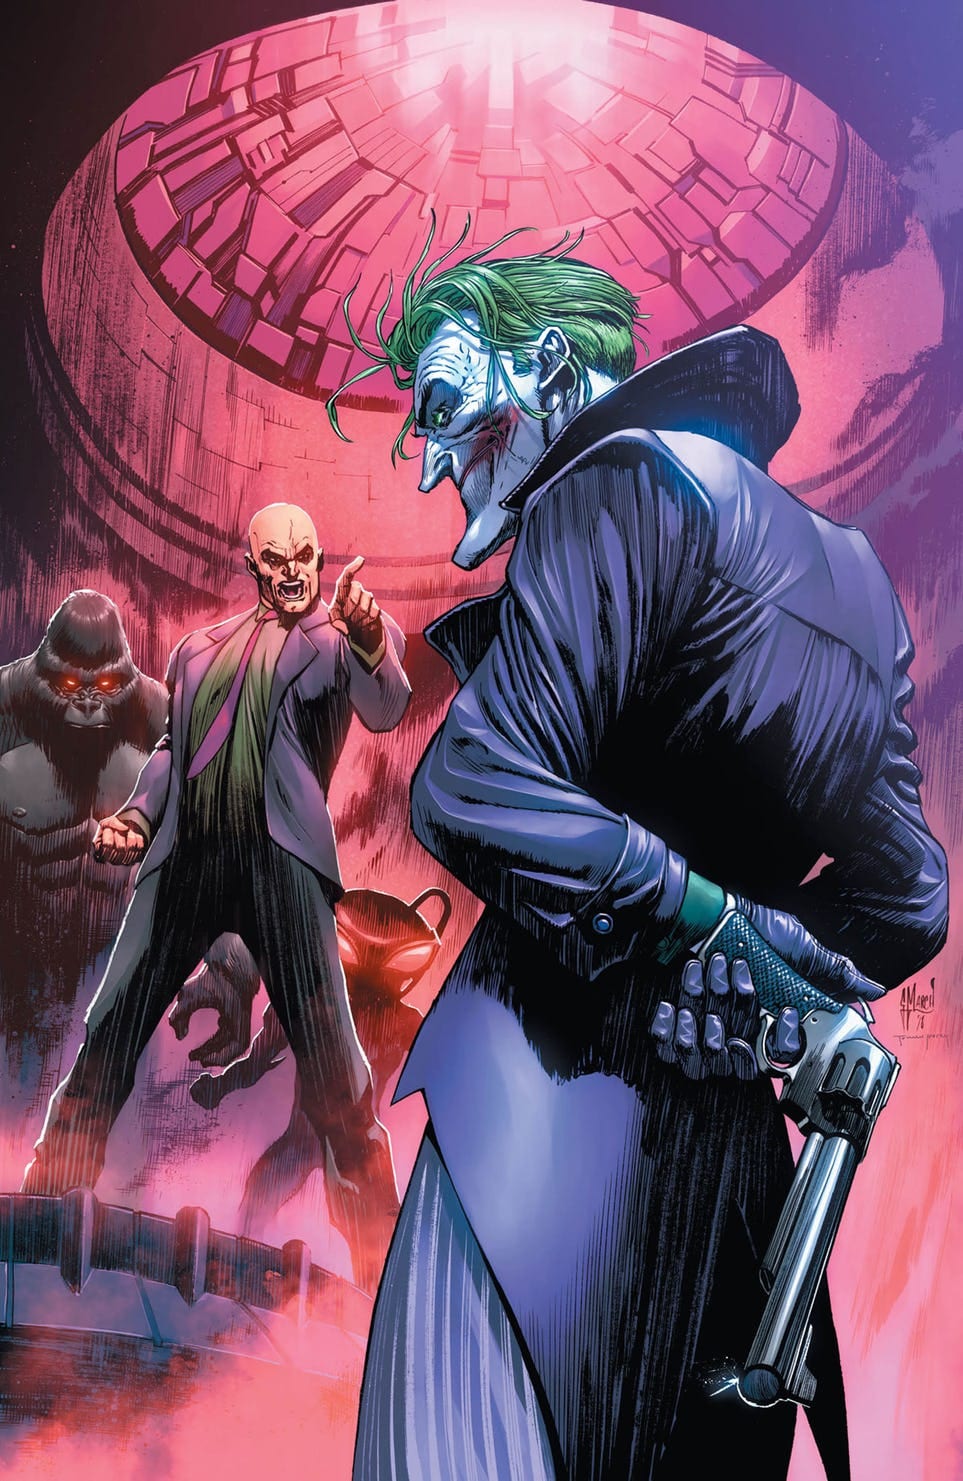 The Batman Who Laughs returns in preview of Justice League #13